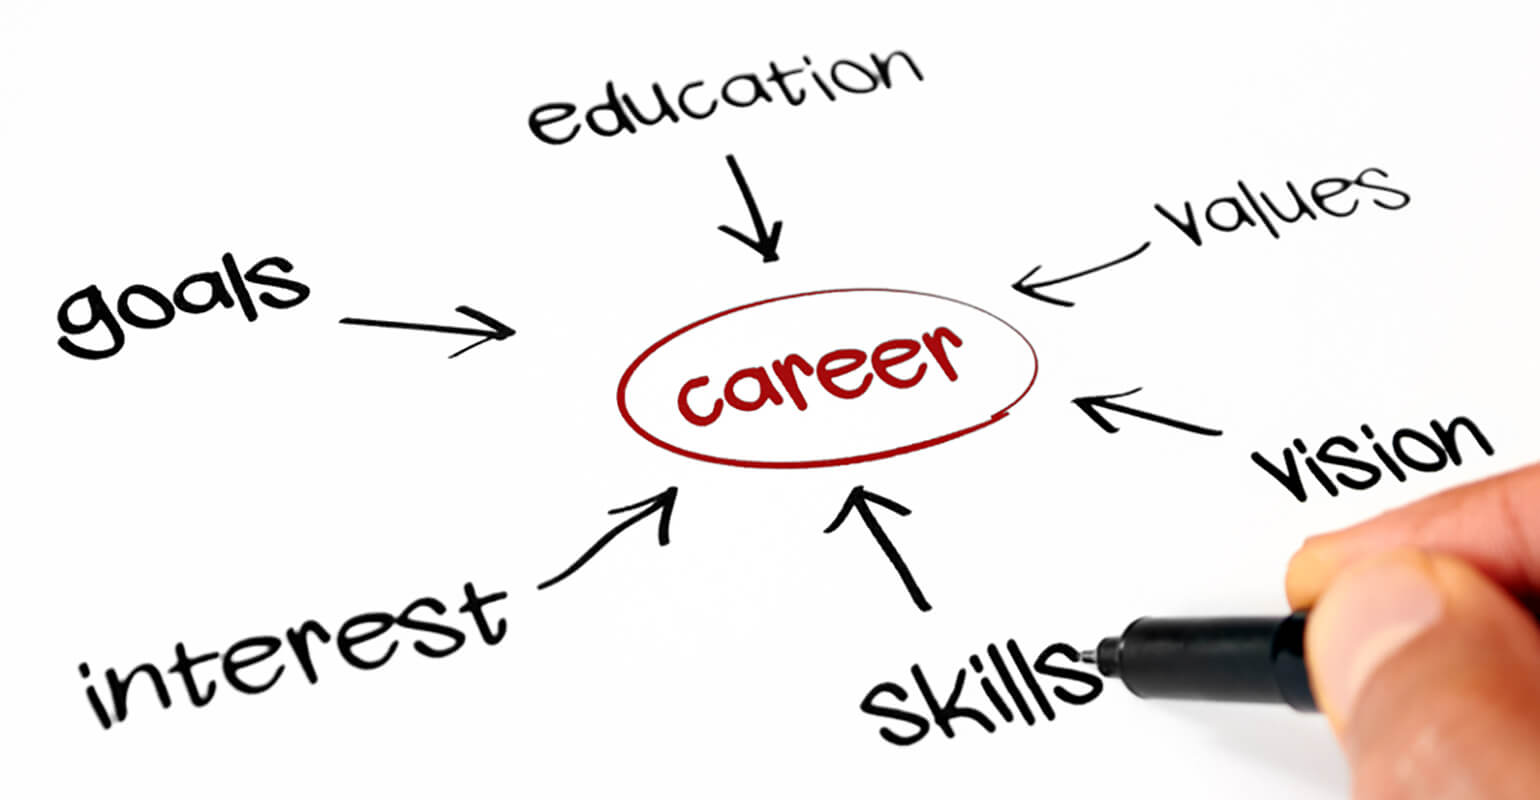 image shows the word career written in dark red ink in a dark red circle. It is surrounded by the words “goals,” “education,” “values,” “vision,” “skills,” and “interest.” Each word has a black arrow pointing from it to the red circle. There is a hand holding a pen positioned as if writing words on the page.